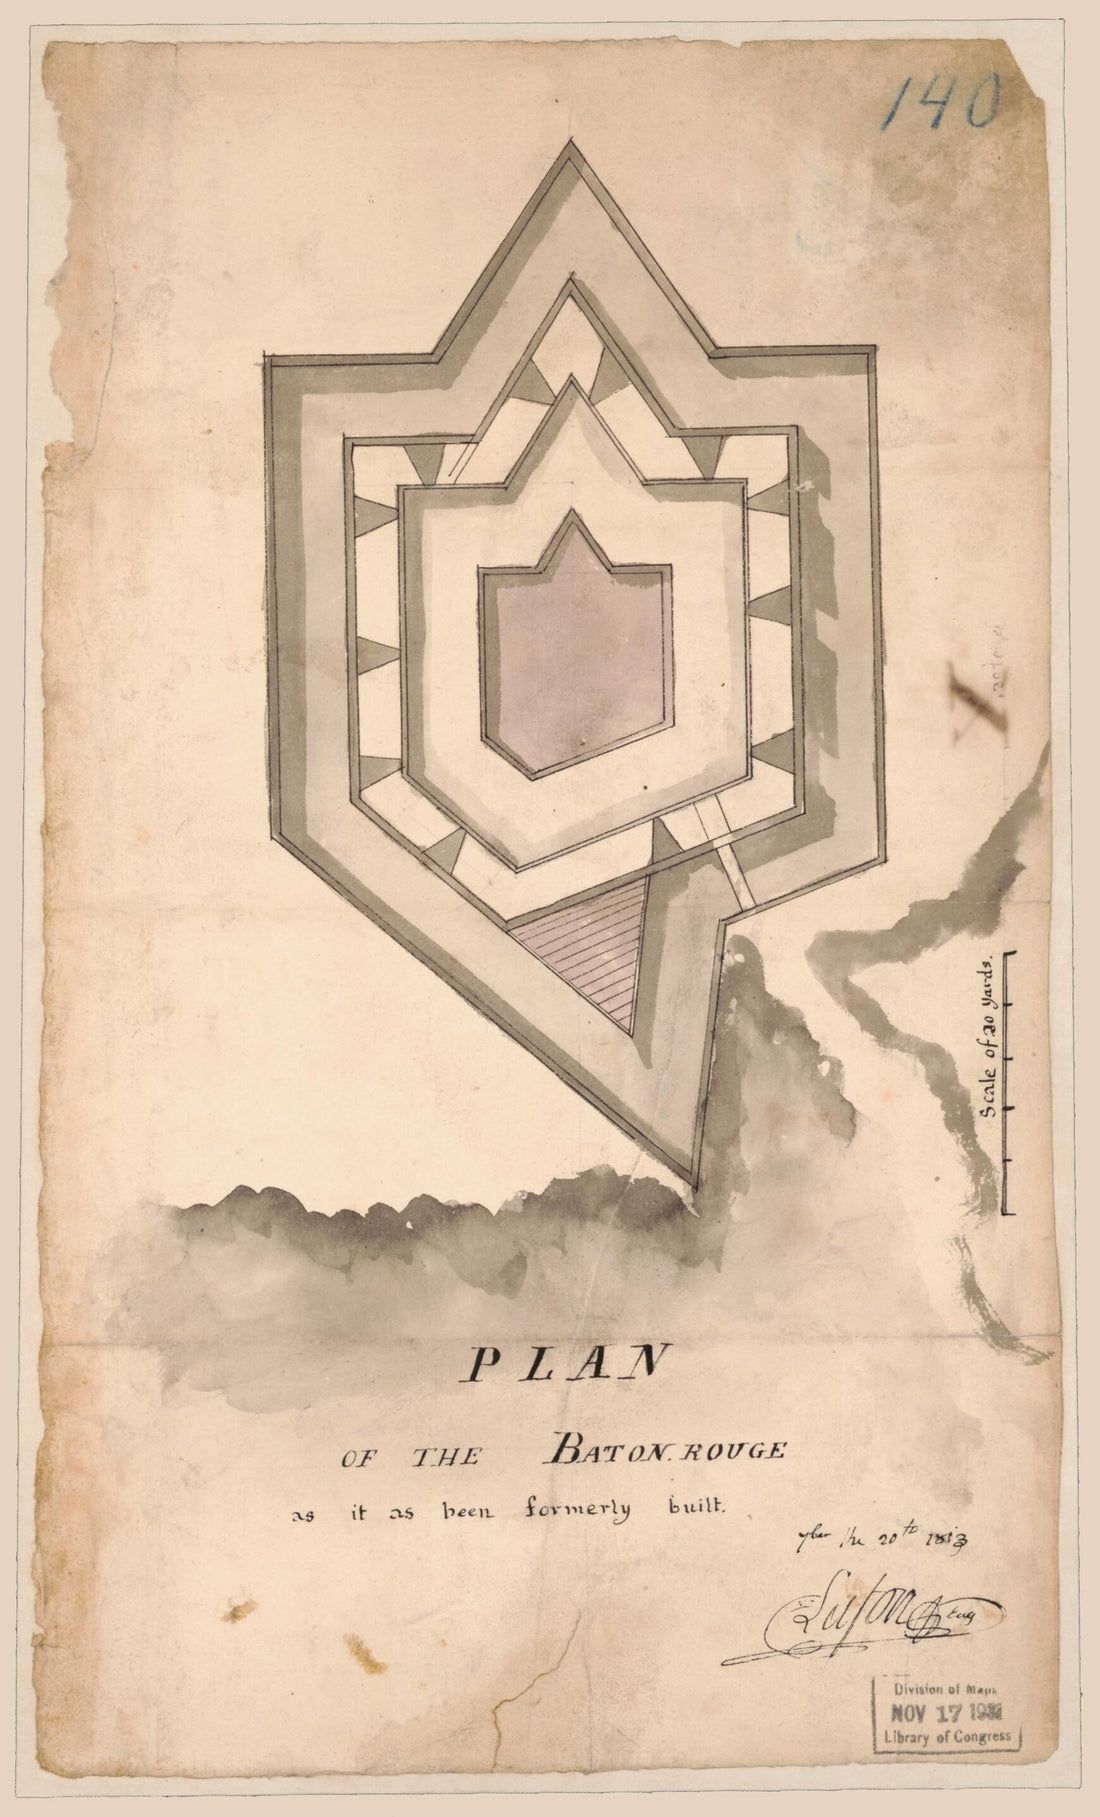 This old map of Plan of the Baton Rouge As It As Been Formerly Built fbar the 20th from 1813 was created by Barthélémy Lafon,  United States. War Department. Office of the Chief of Engineers in 1813